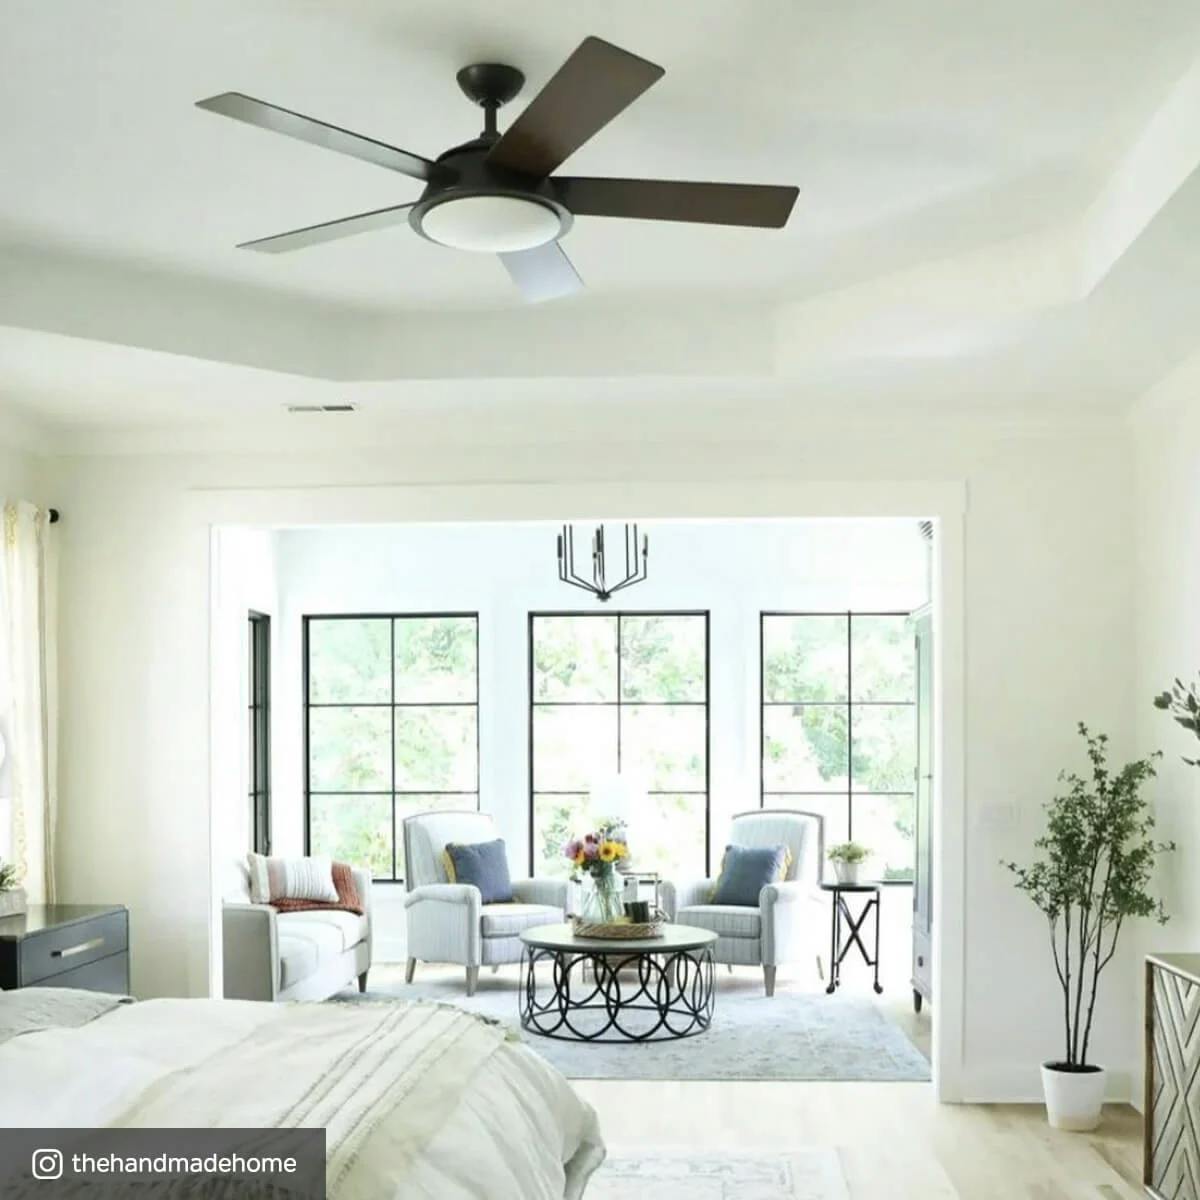 Instagram post from the handmade home featuring a ceiling fan in a bedroom